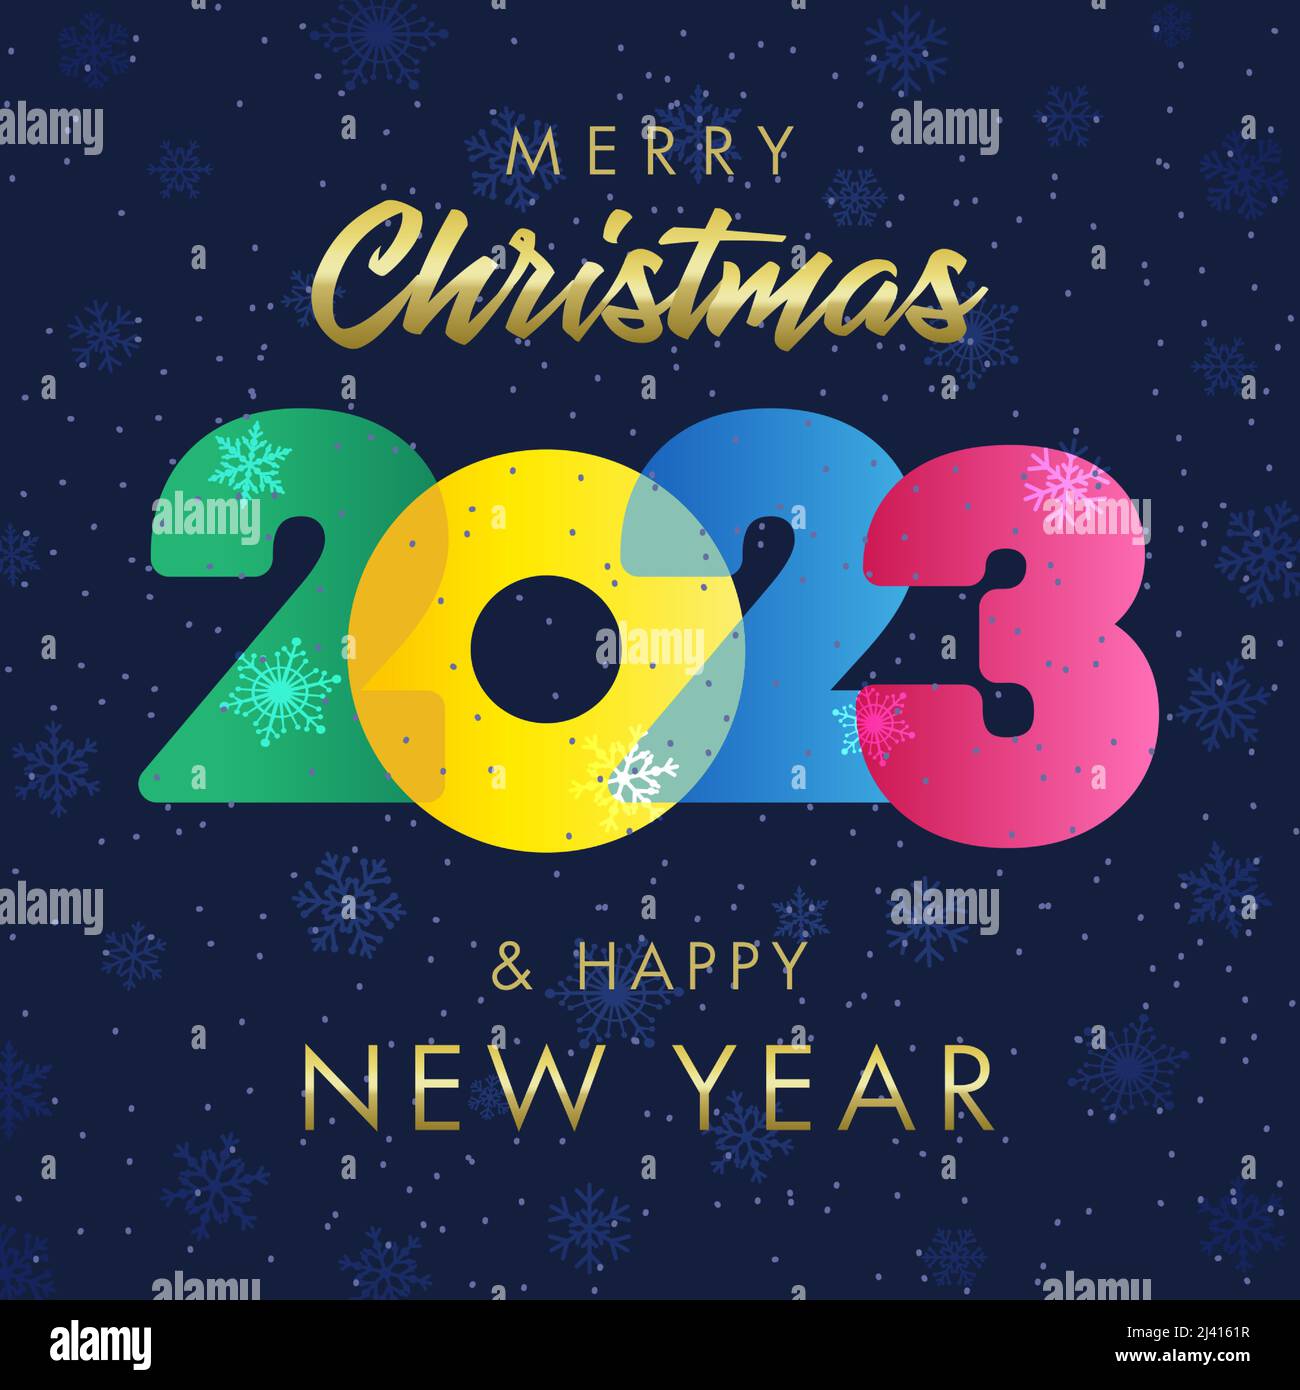 merry christmas and happy new year graphics